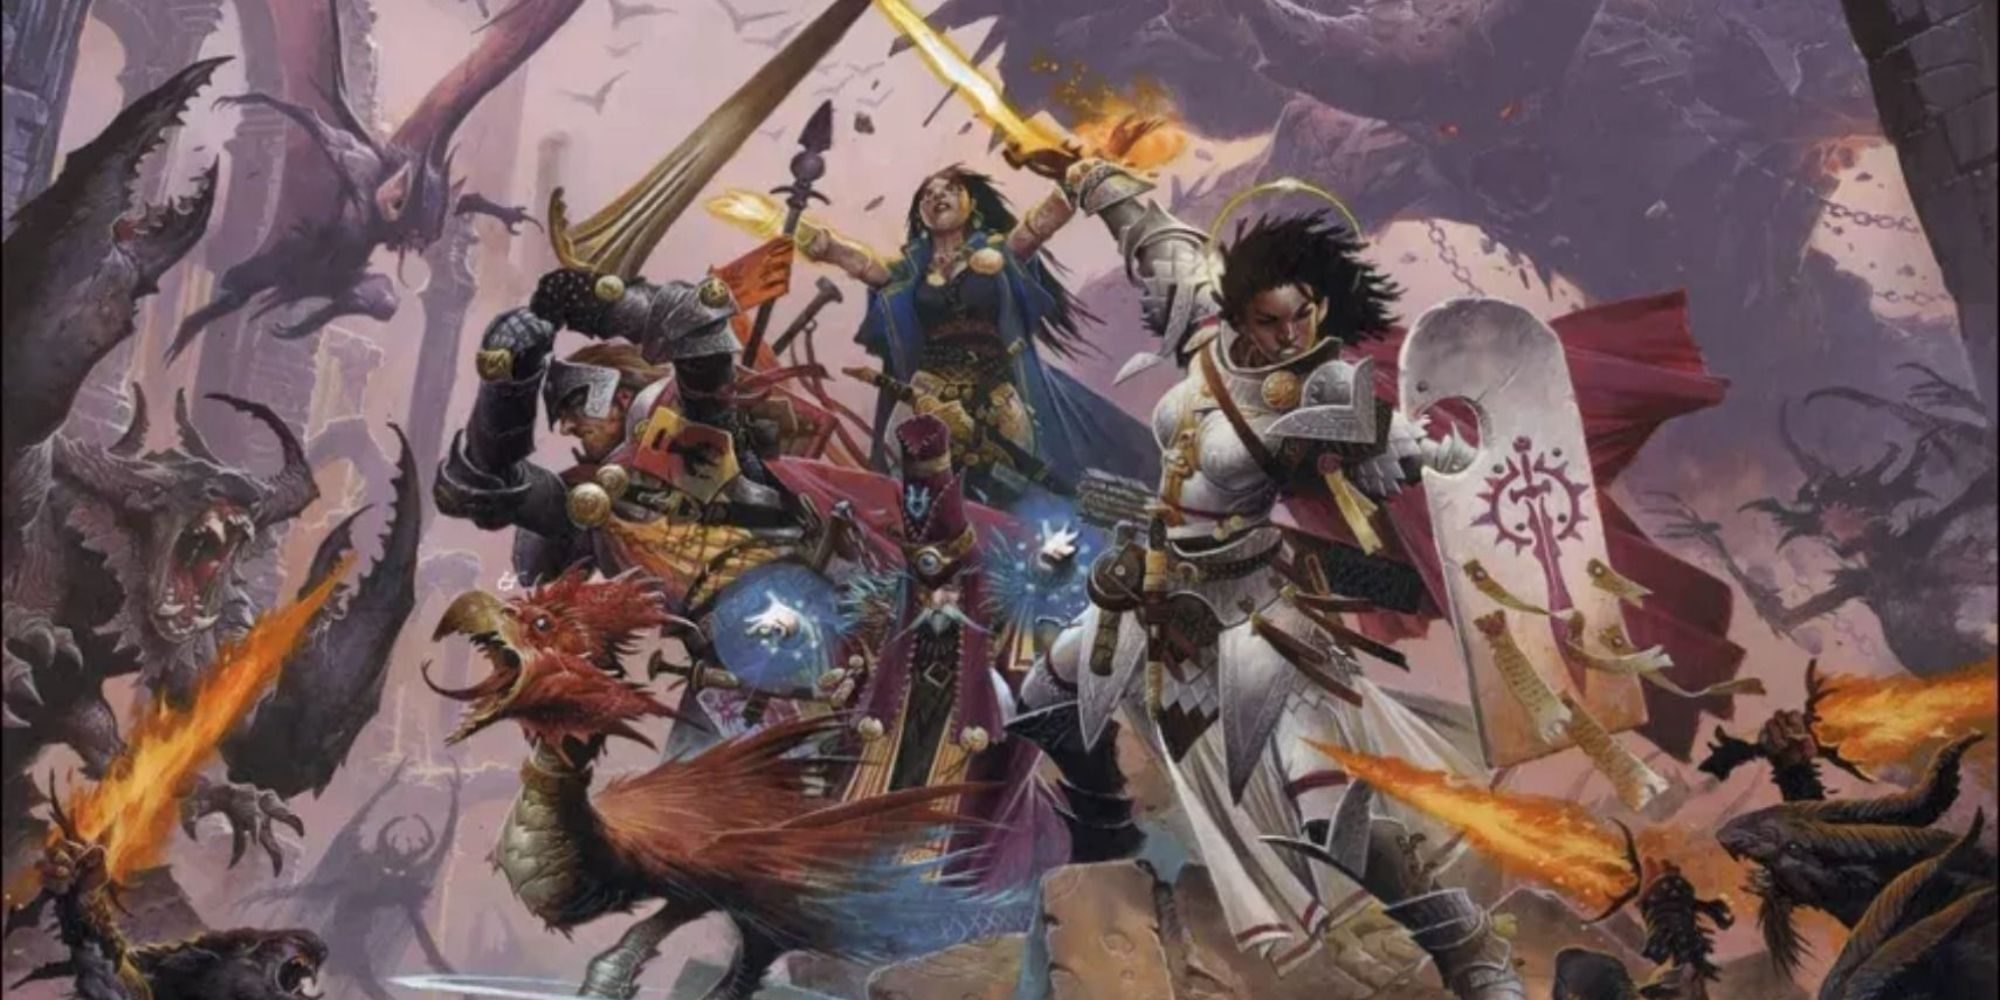 pathfinder-wrath-of-the-righteous-kickstarter-goals-cover-9504495